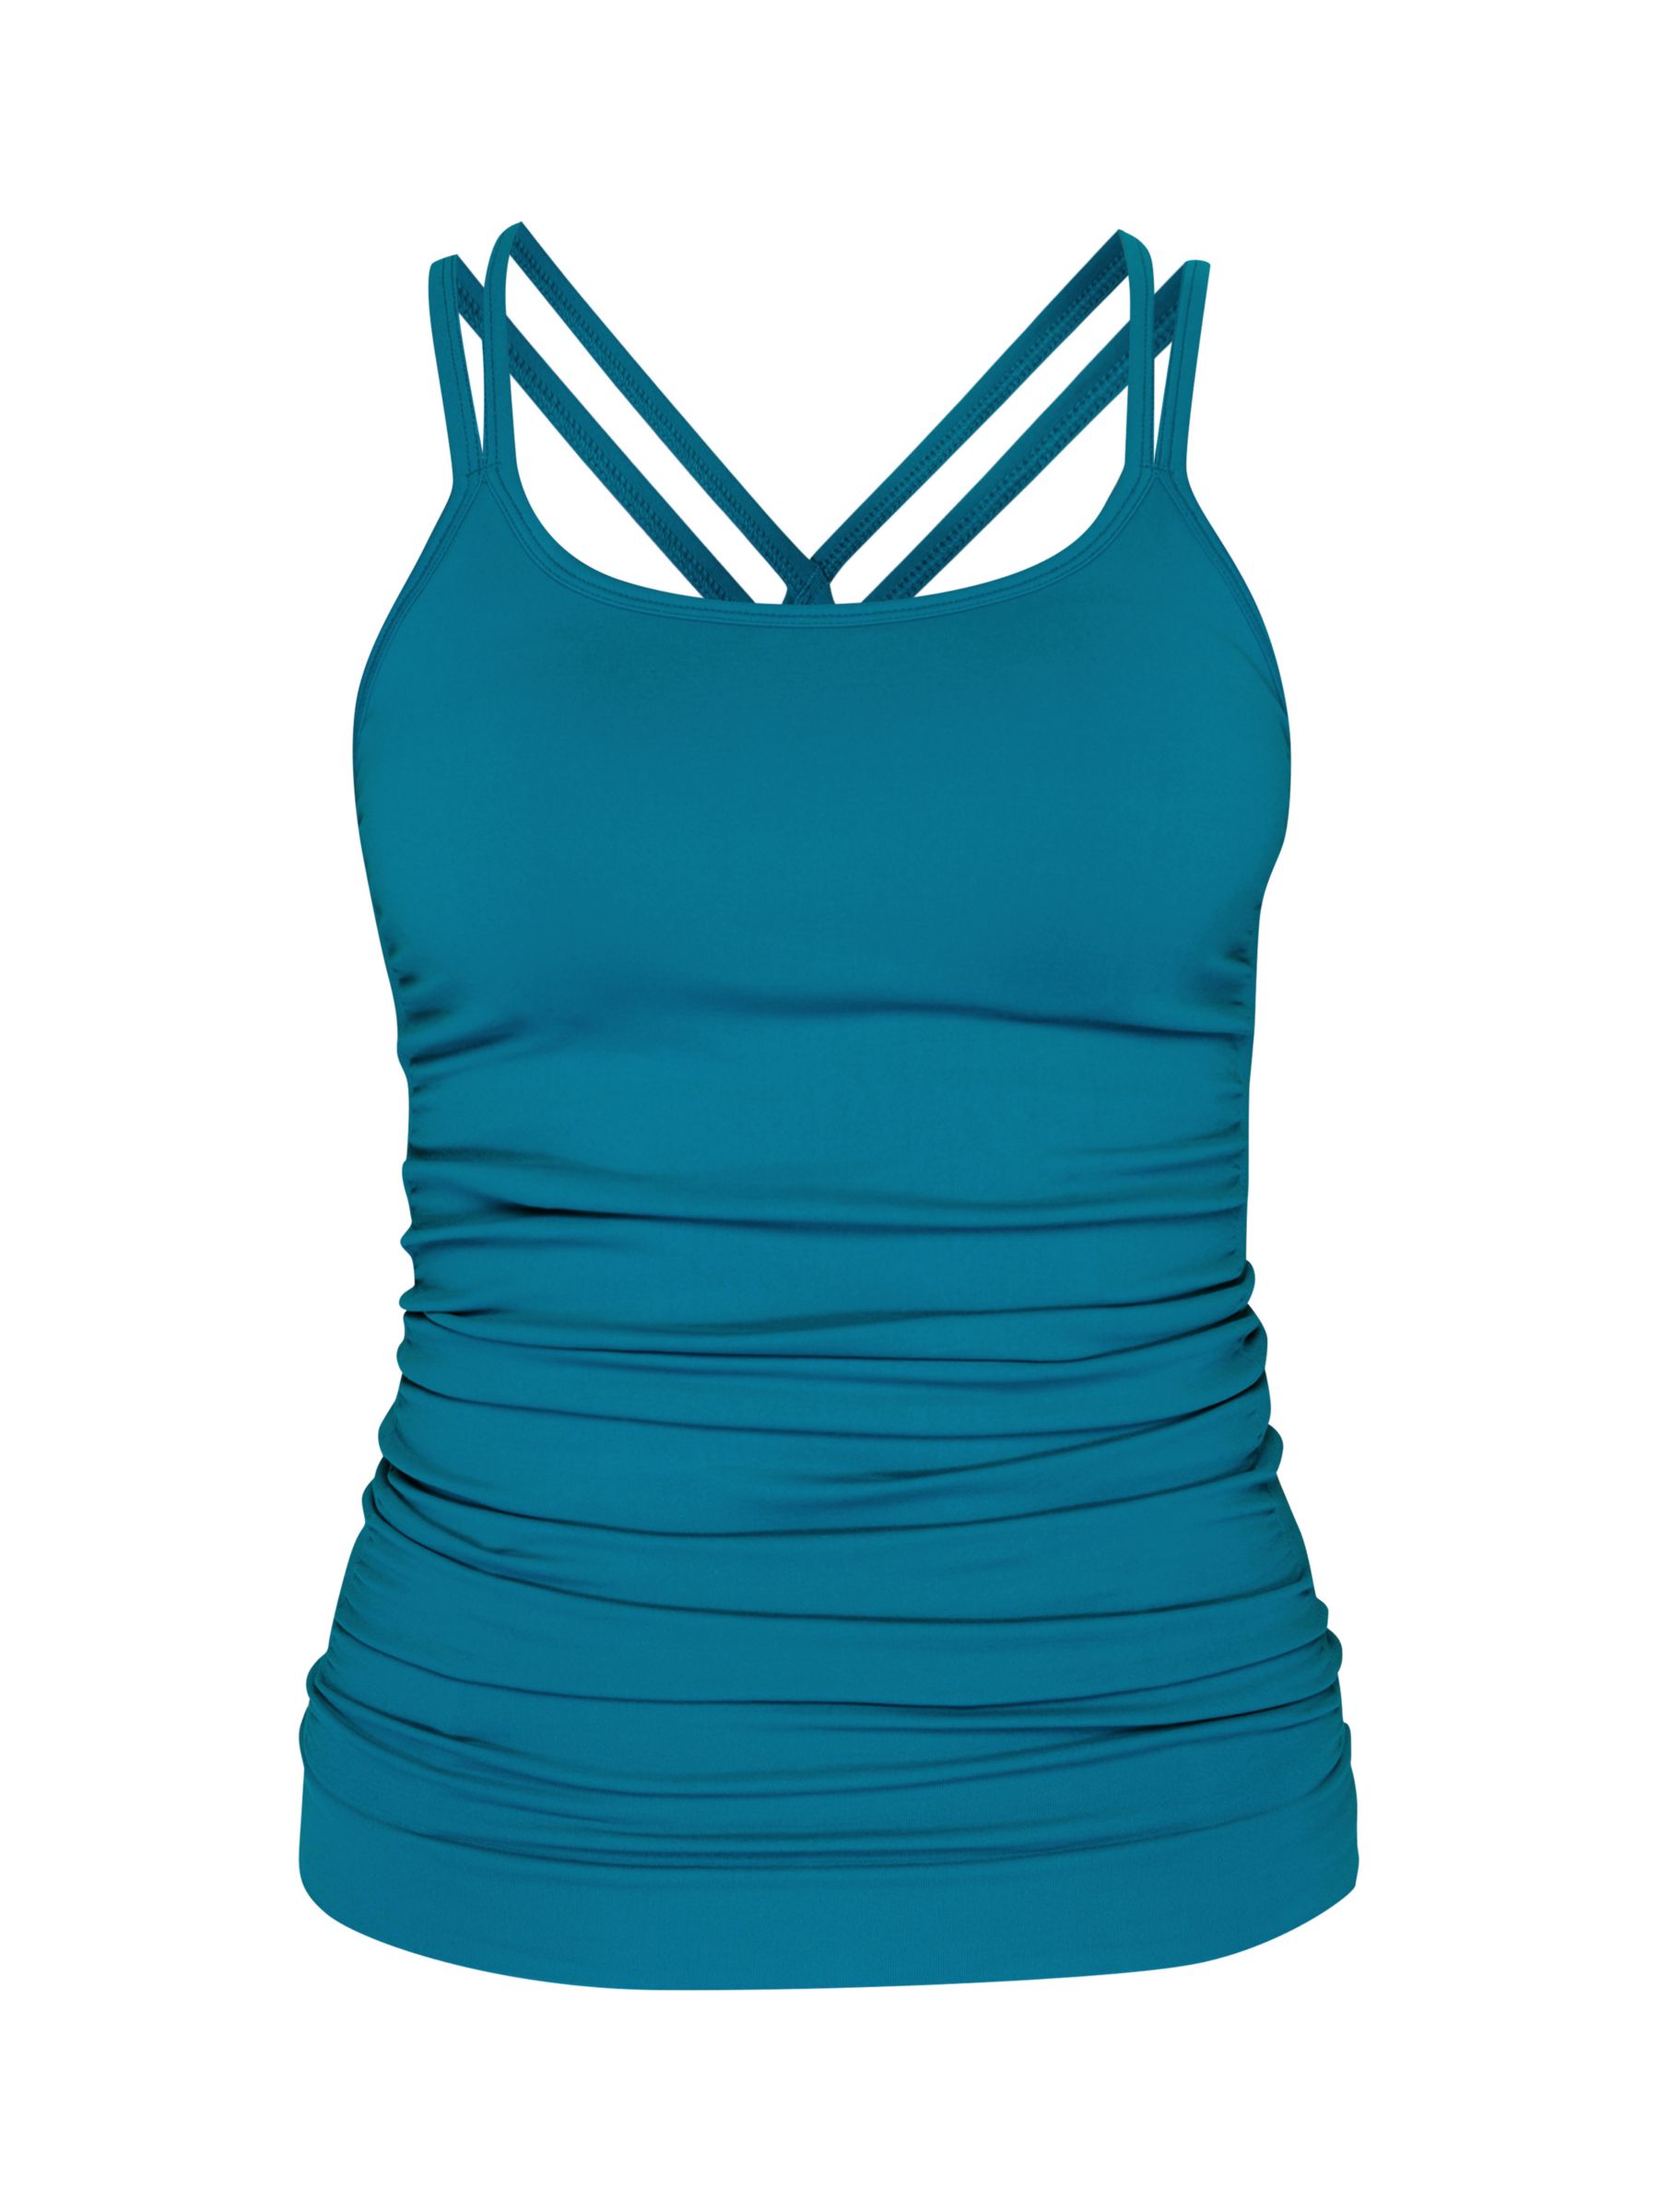 Sweaty Betty Poise Yoga Tank Top, Reef Teal Blue at John Lewis & Partners